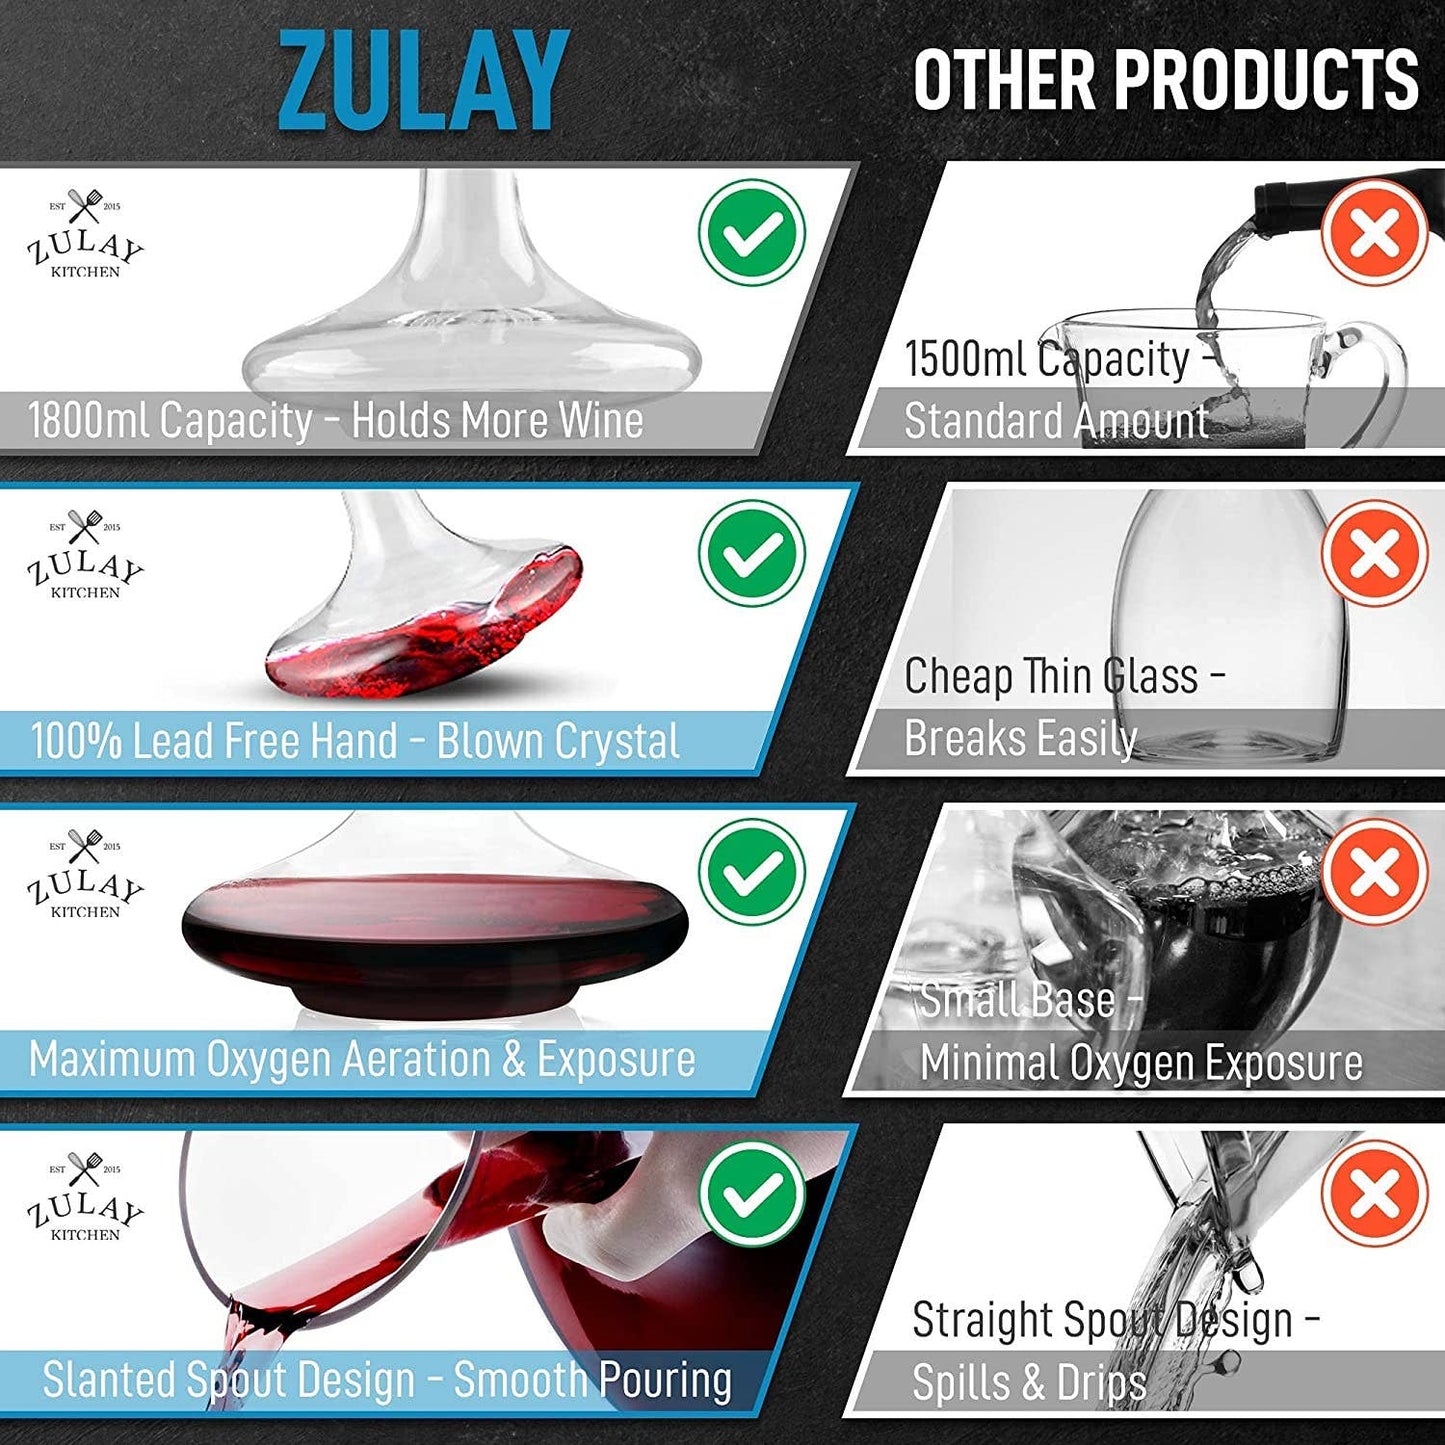 Zulay Premium Crystal Red Wine Decanter